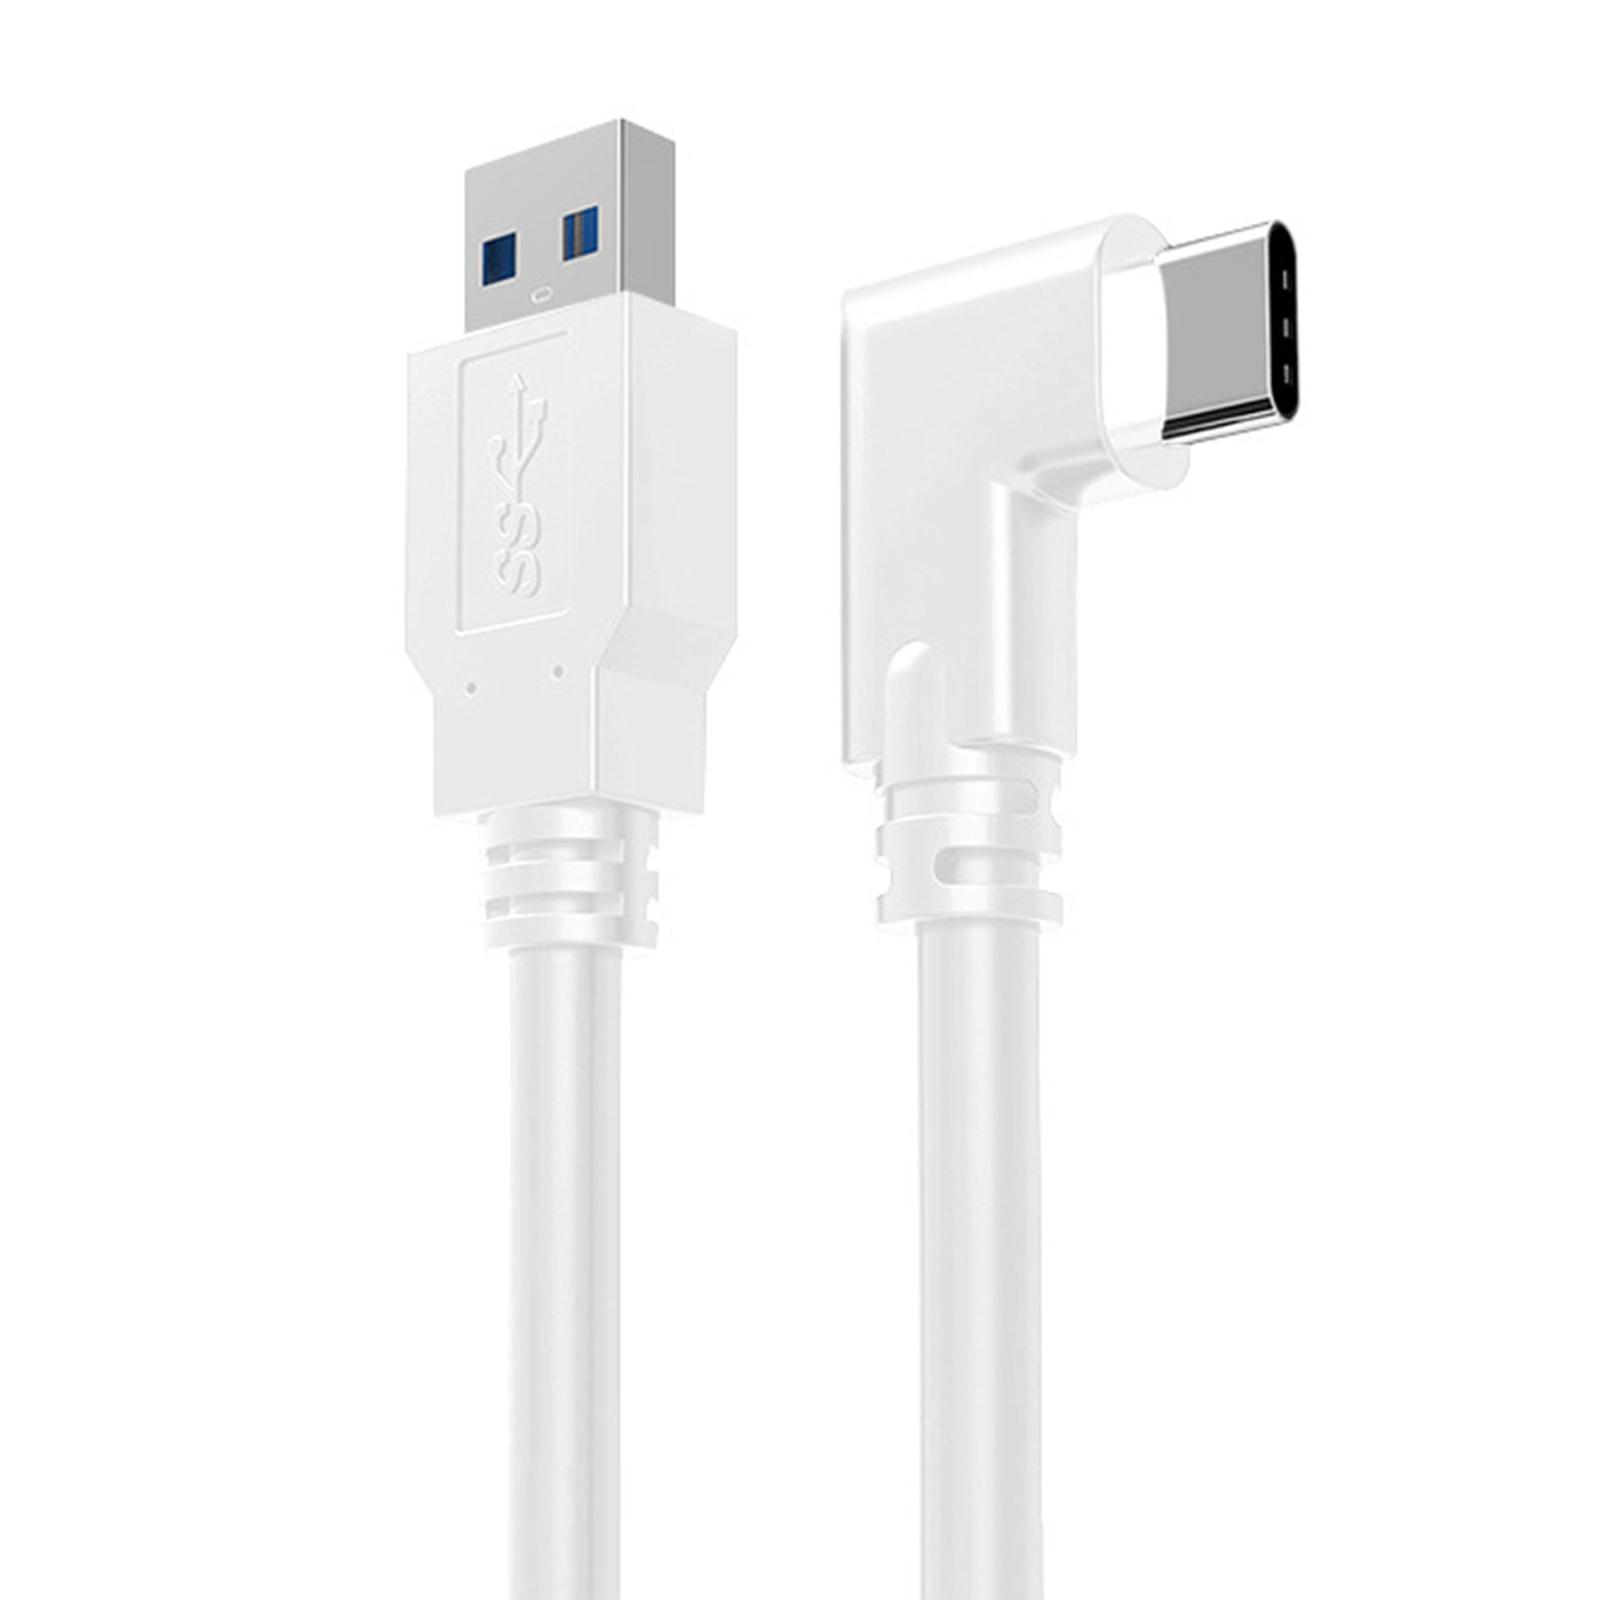 USB C Cable Link Cable USB A to USB C for USB C Devices A to C 5m White